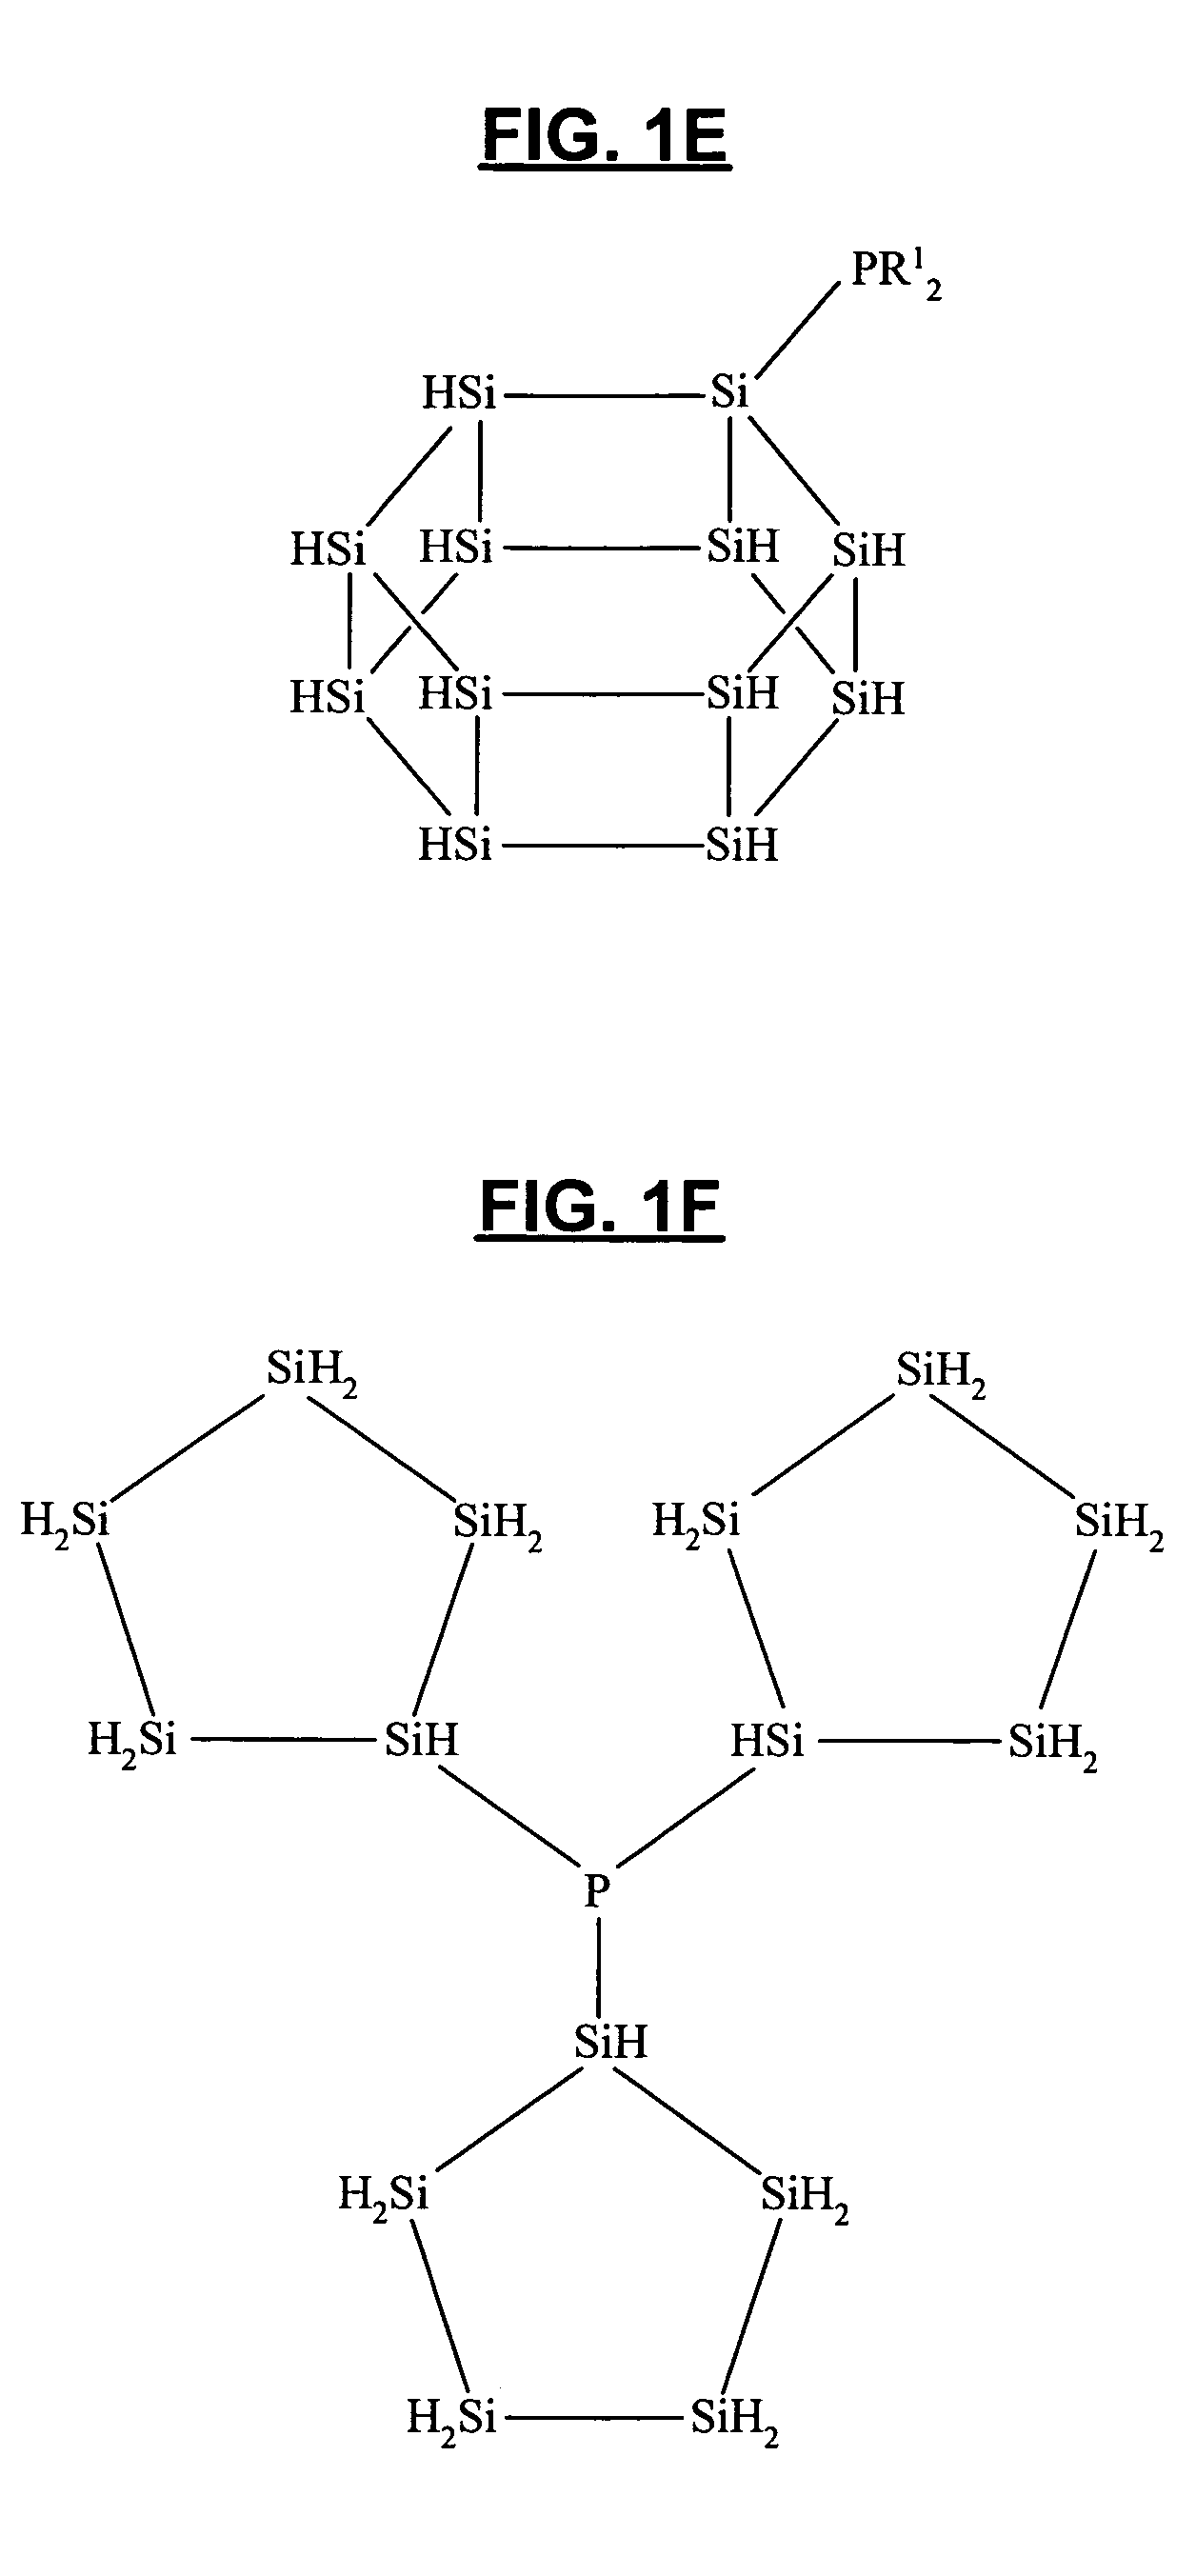 Dopant group-substituted semiconductor precursor compounds, compositions containing the same, and methods of making such compounds and compositions